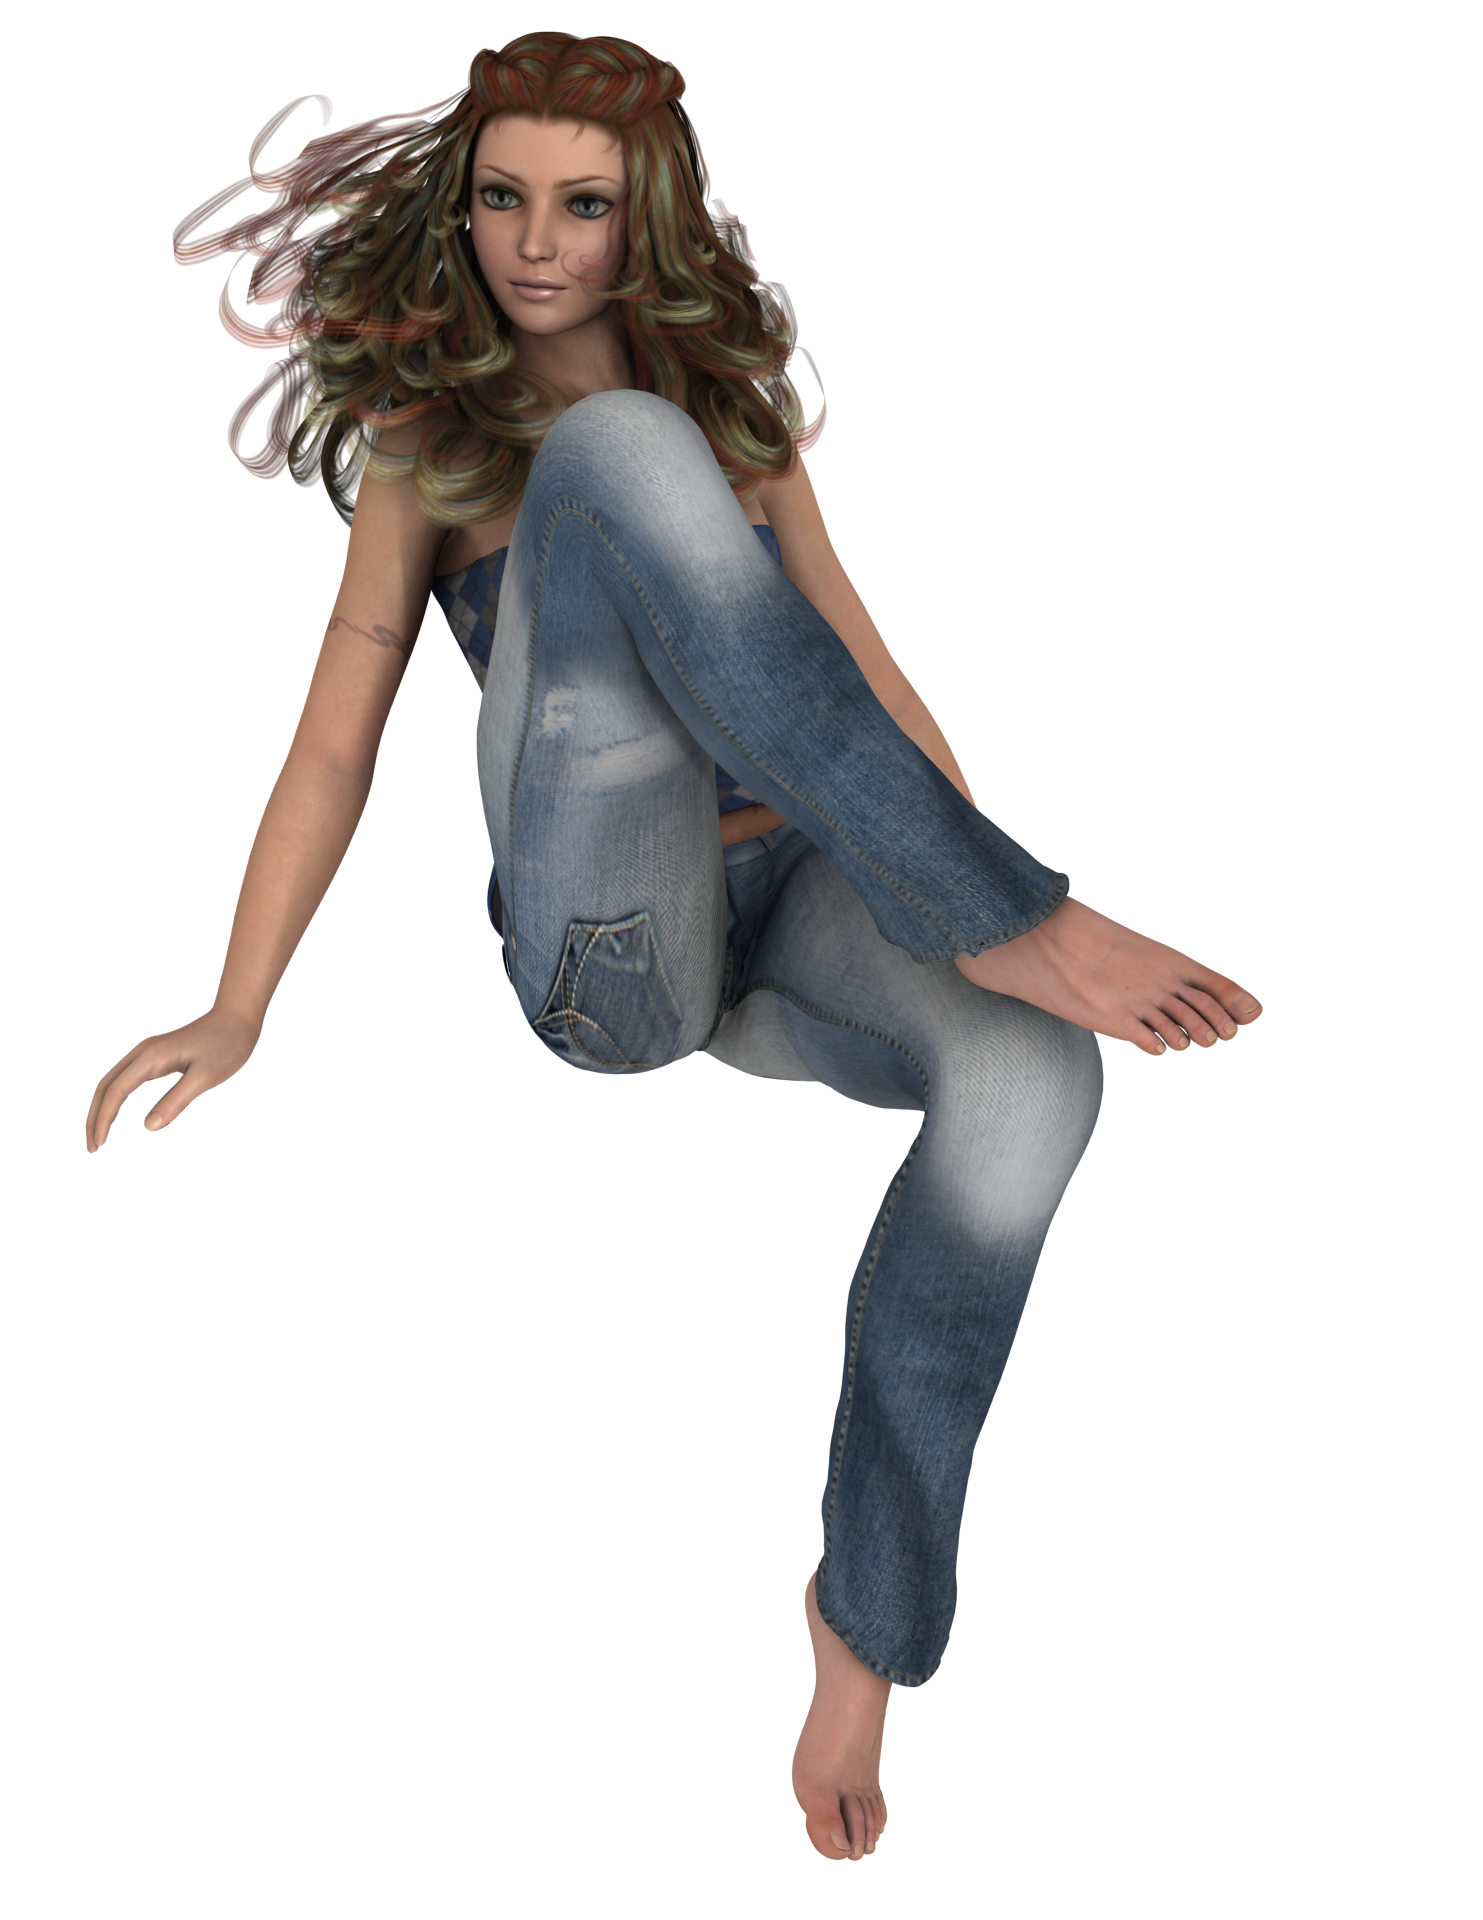 Clipart of the woman is wearing jeans free image.